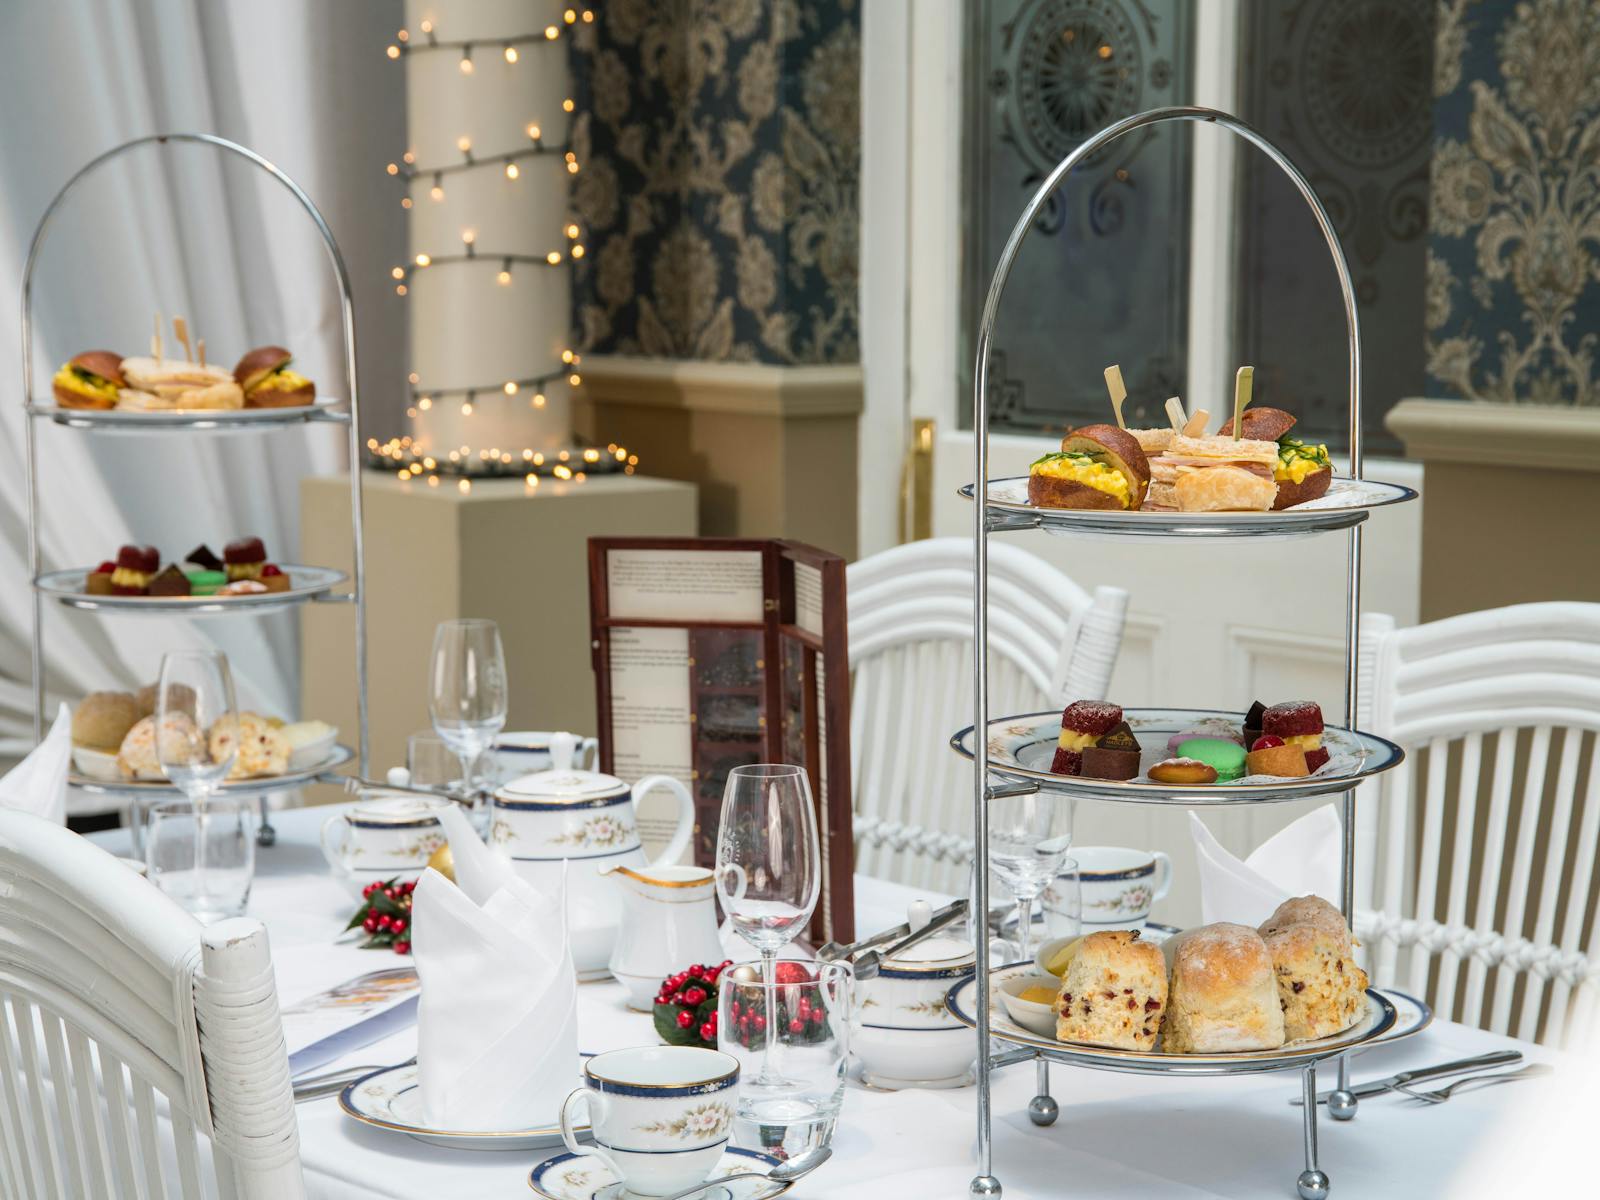 Afternoon Tea at Hadley's. Two tiers of scones, sandwiches and sweet treats served in the Atrium.